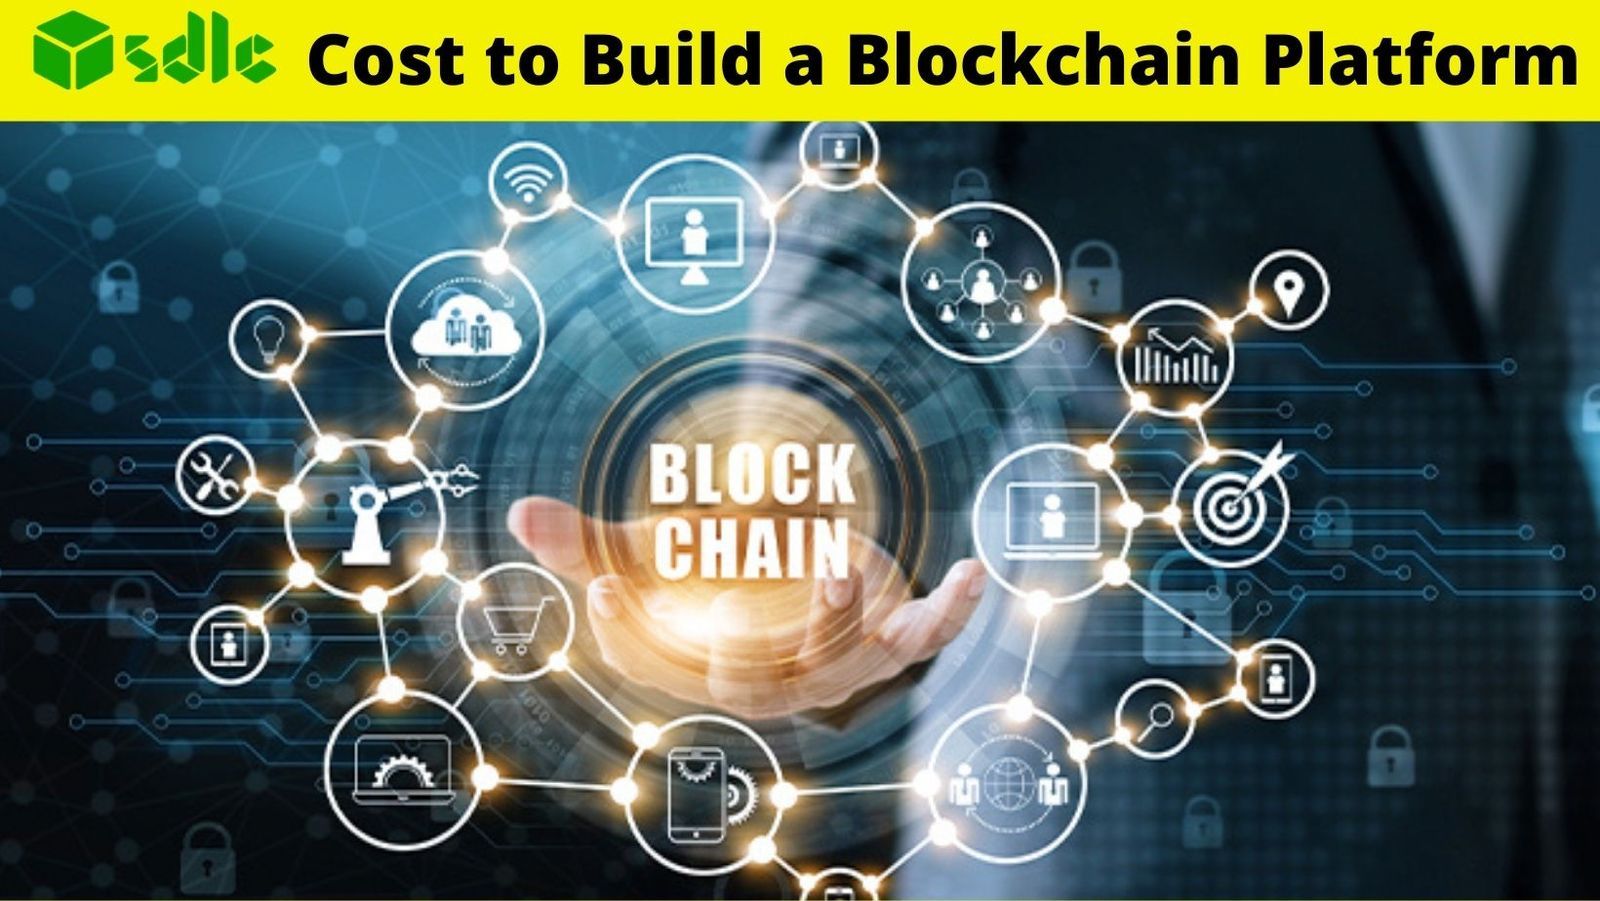 How Much Does It Cost to Build a Blockchain Platform?